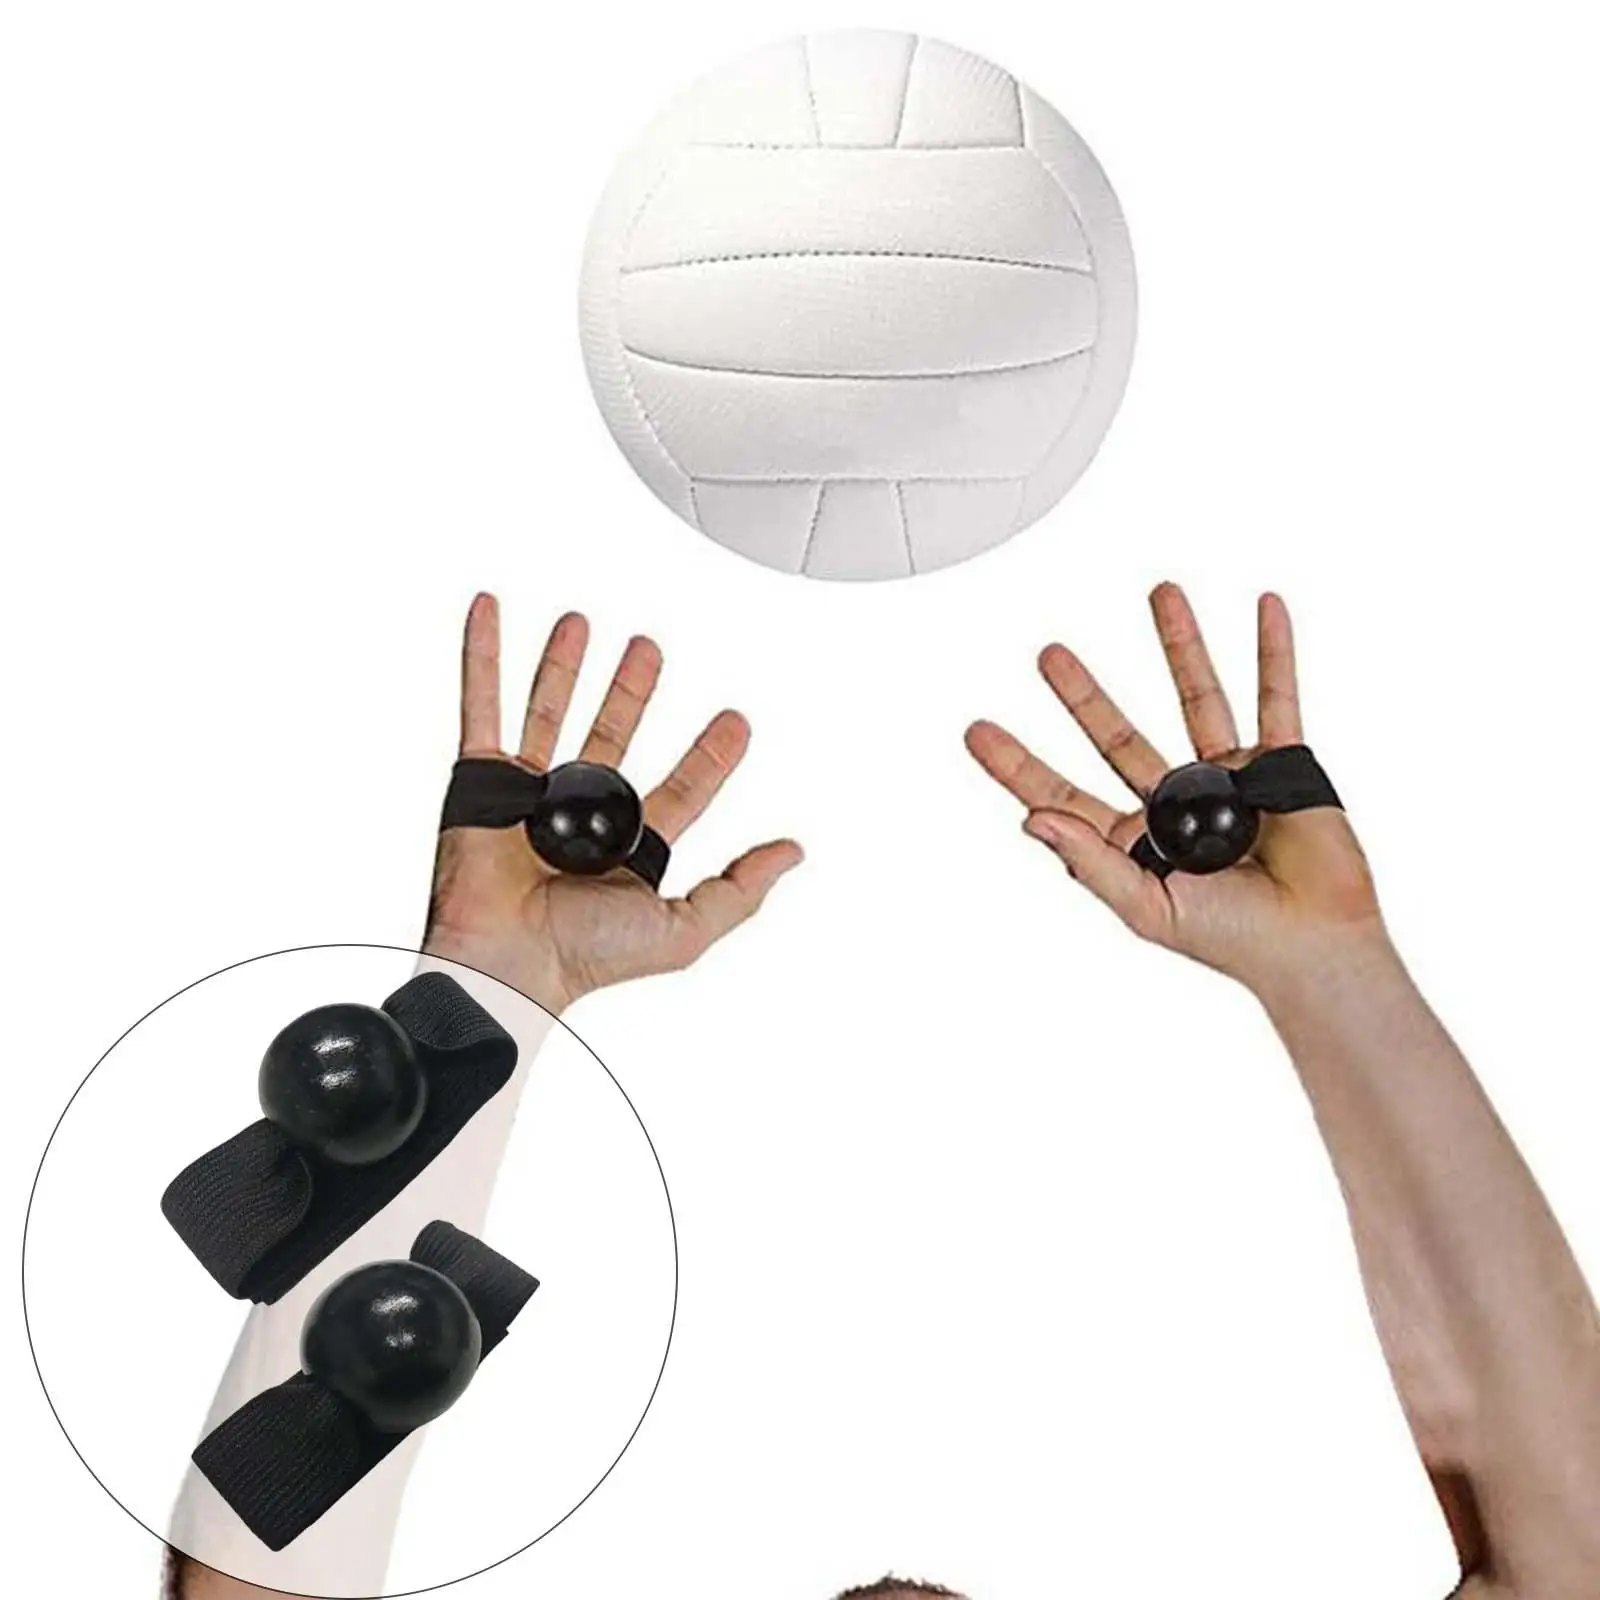 2 Pieces Volleyball Setting Drills Training Aid, Catching Trainer Volleyball